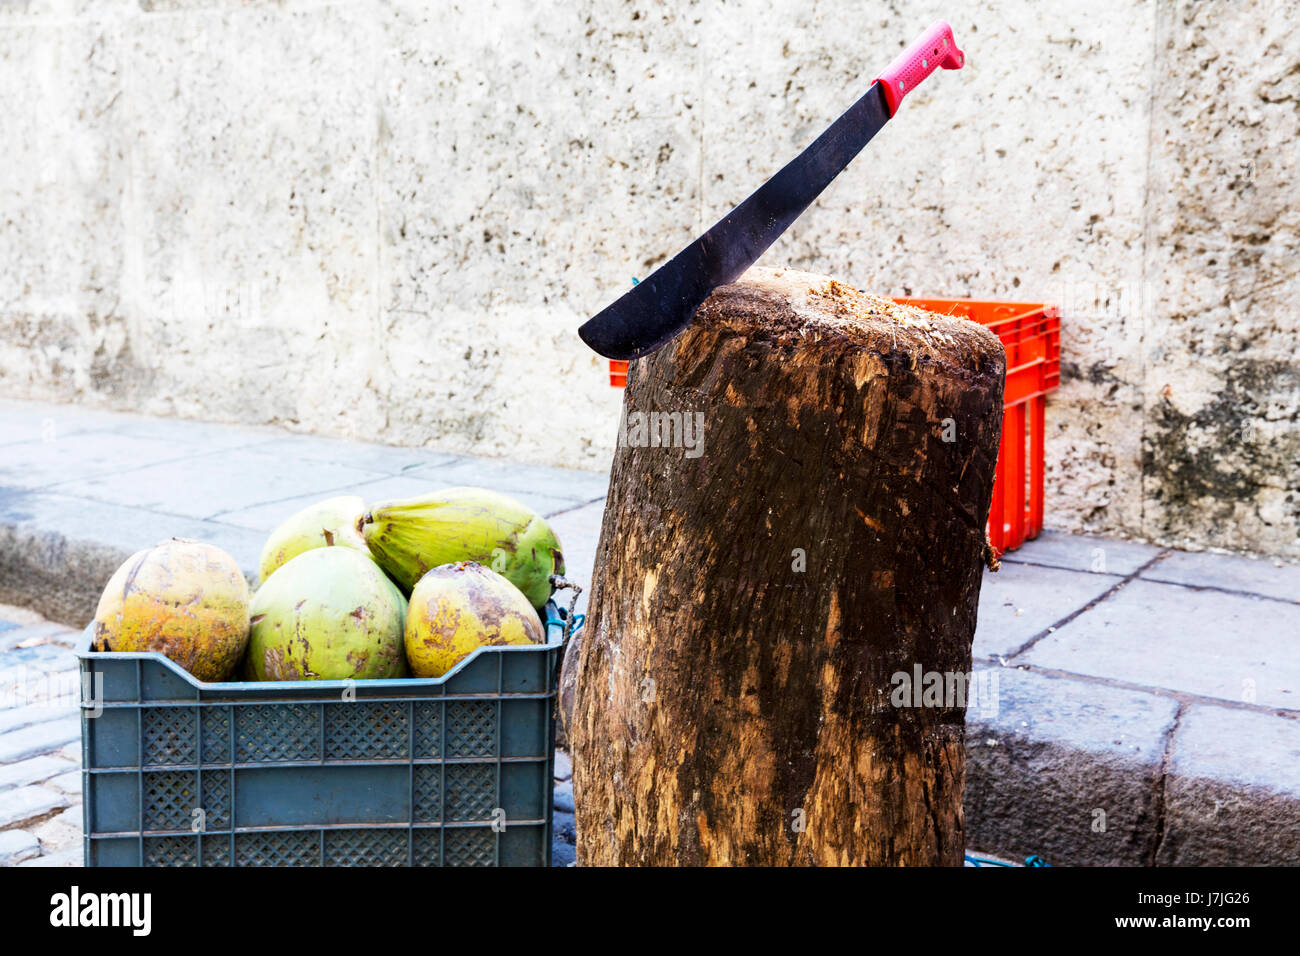 Machete used to chop coconuts for drinks, machete knife, machete, weapon, knife, machete in block of wood Stock Photo